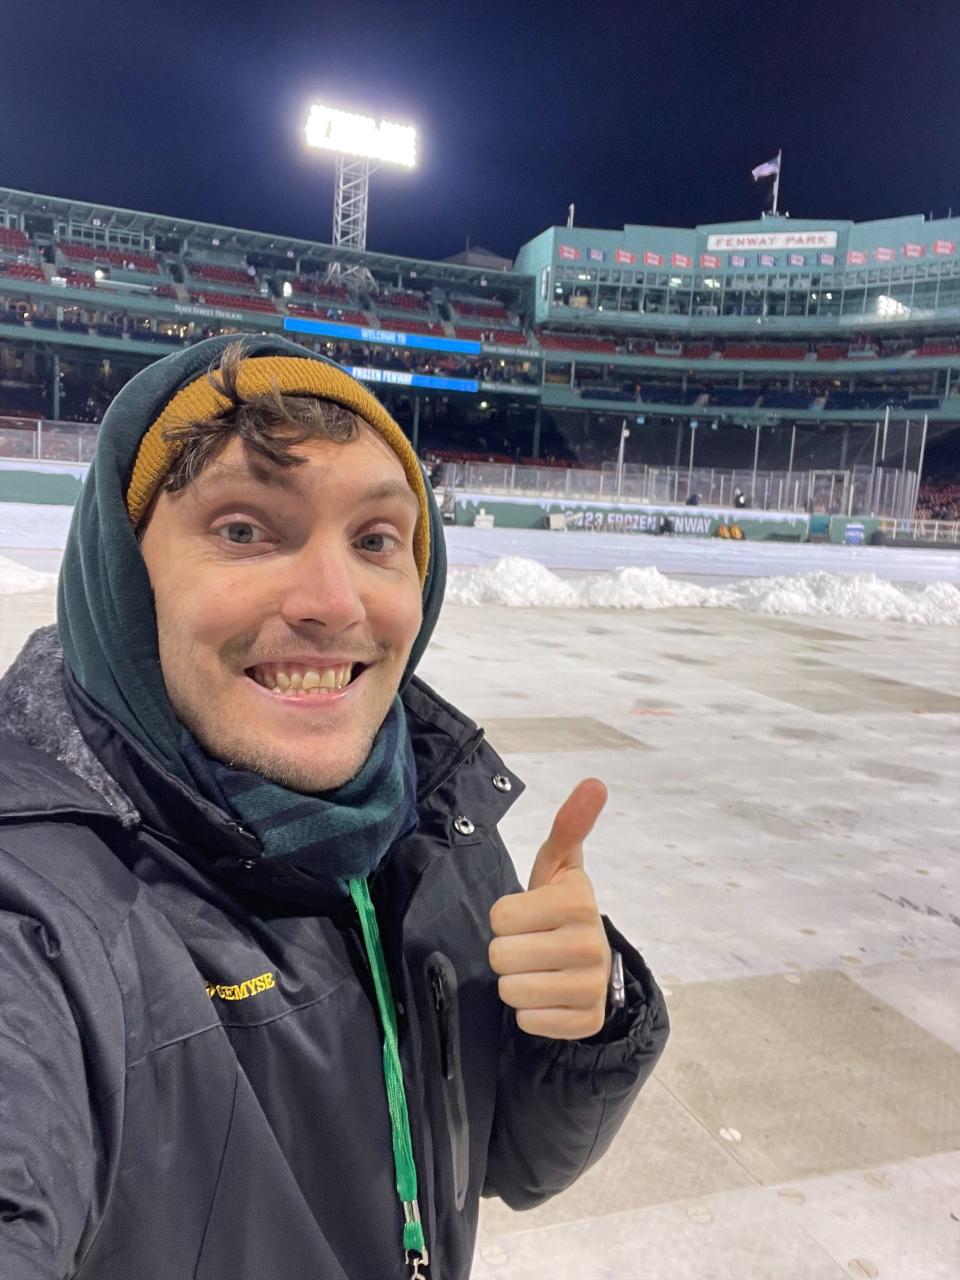 New MetroWest and Milford Daily News sports reporter Kyle Grabowski at Fenway Park covering Frozen Fenway in January 2023.